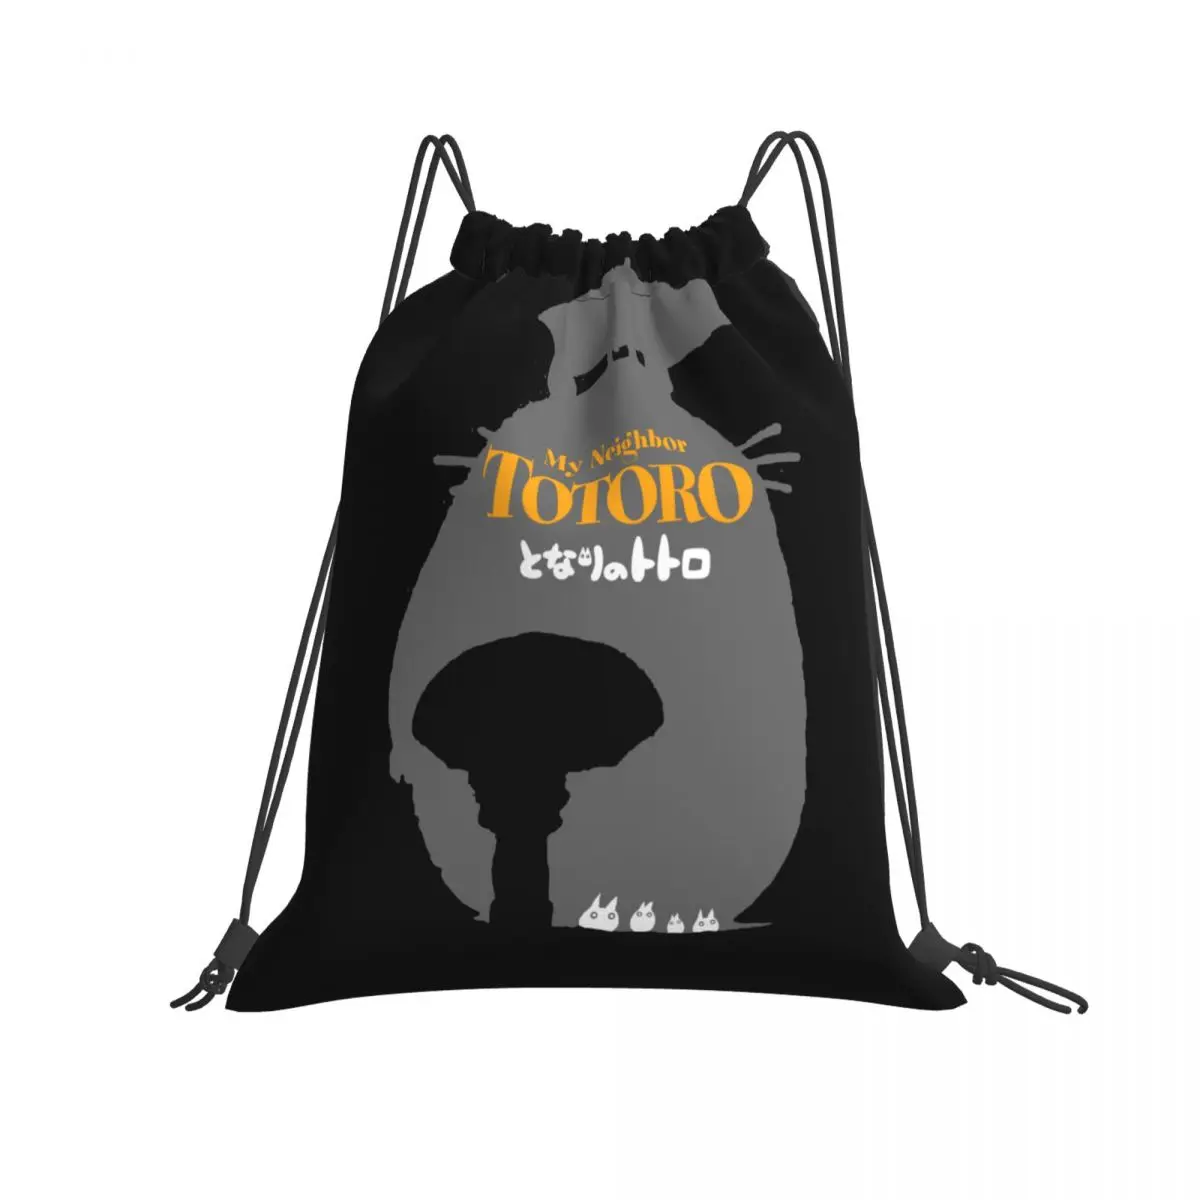 

Foldable String Backpack for Gym Outdoor My Neighbor Totoro Running Travel School Eco Friendly Shopping Bag